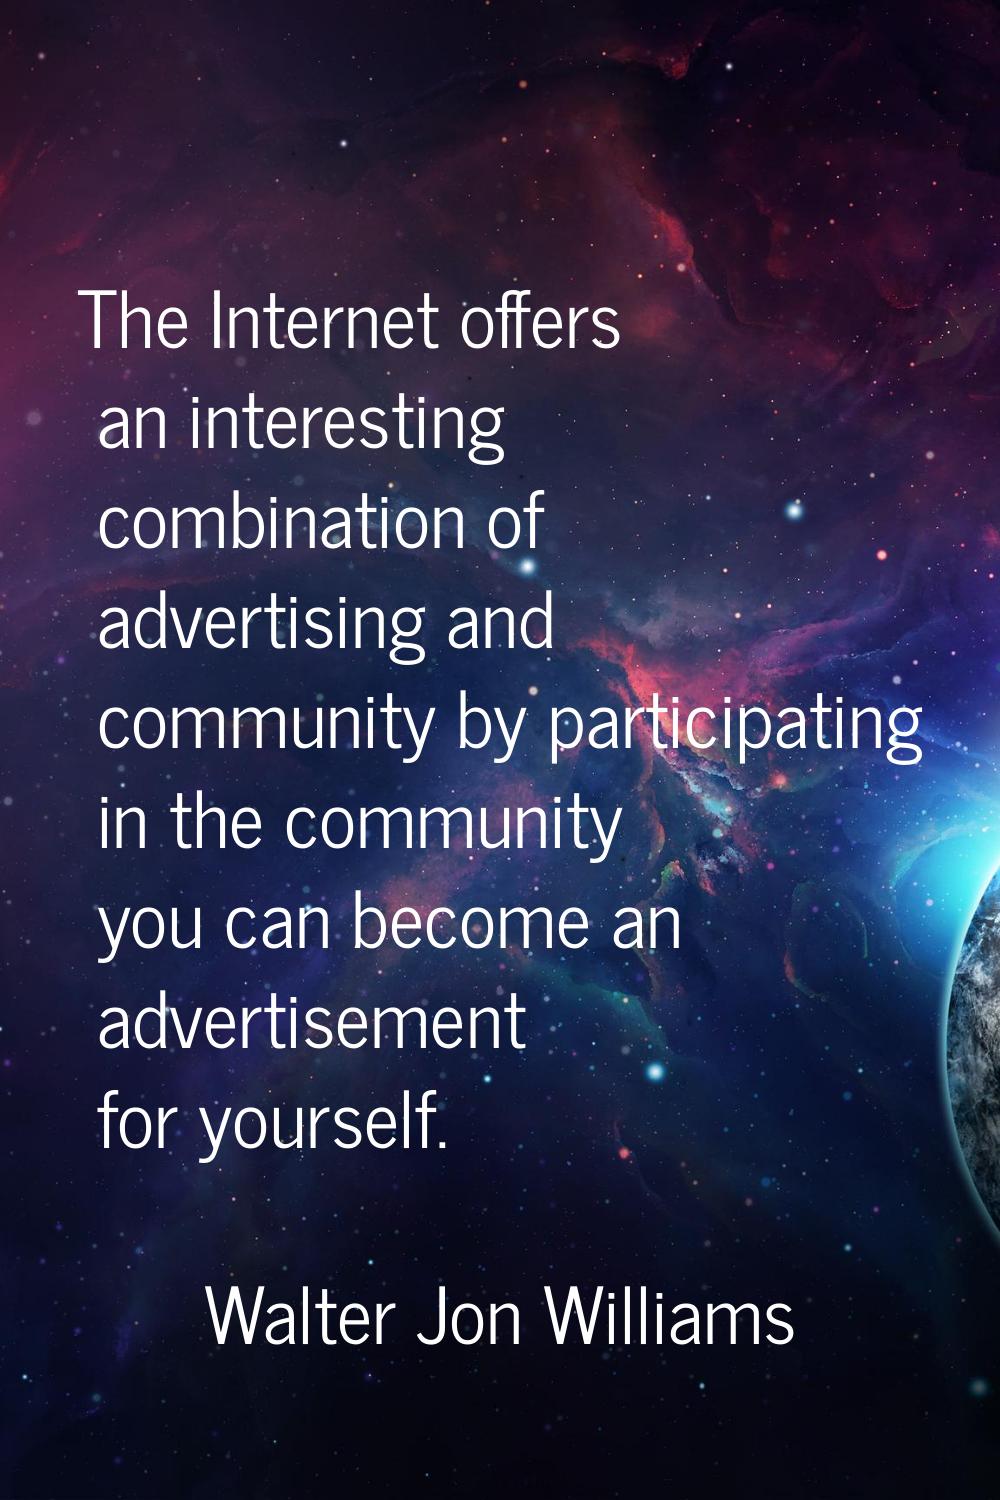 The Internet offers an interesting combination of advertising and community by participating in the